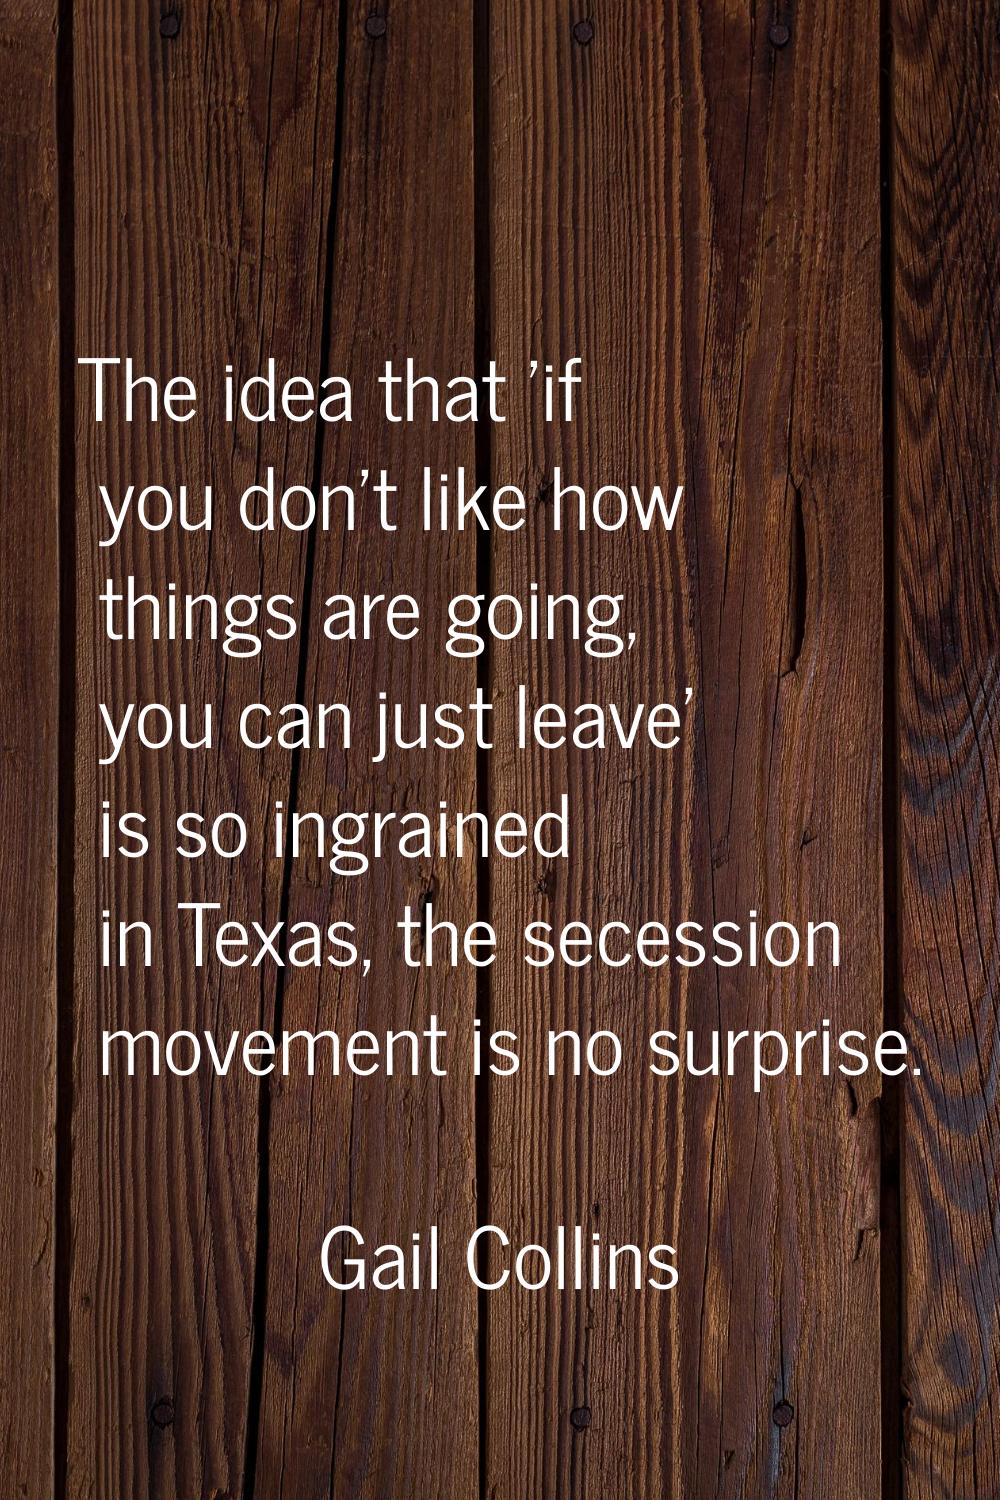 The idea that 'if you don't like how things are going, you can just leave' is so ingrained in Texas